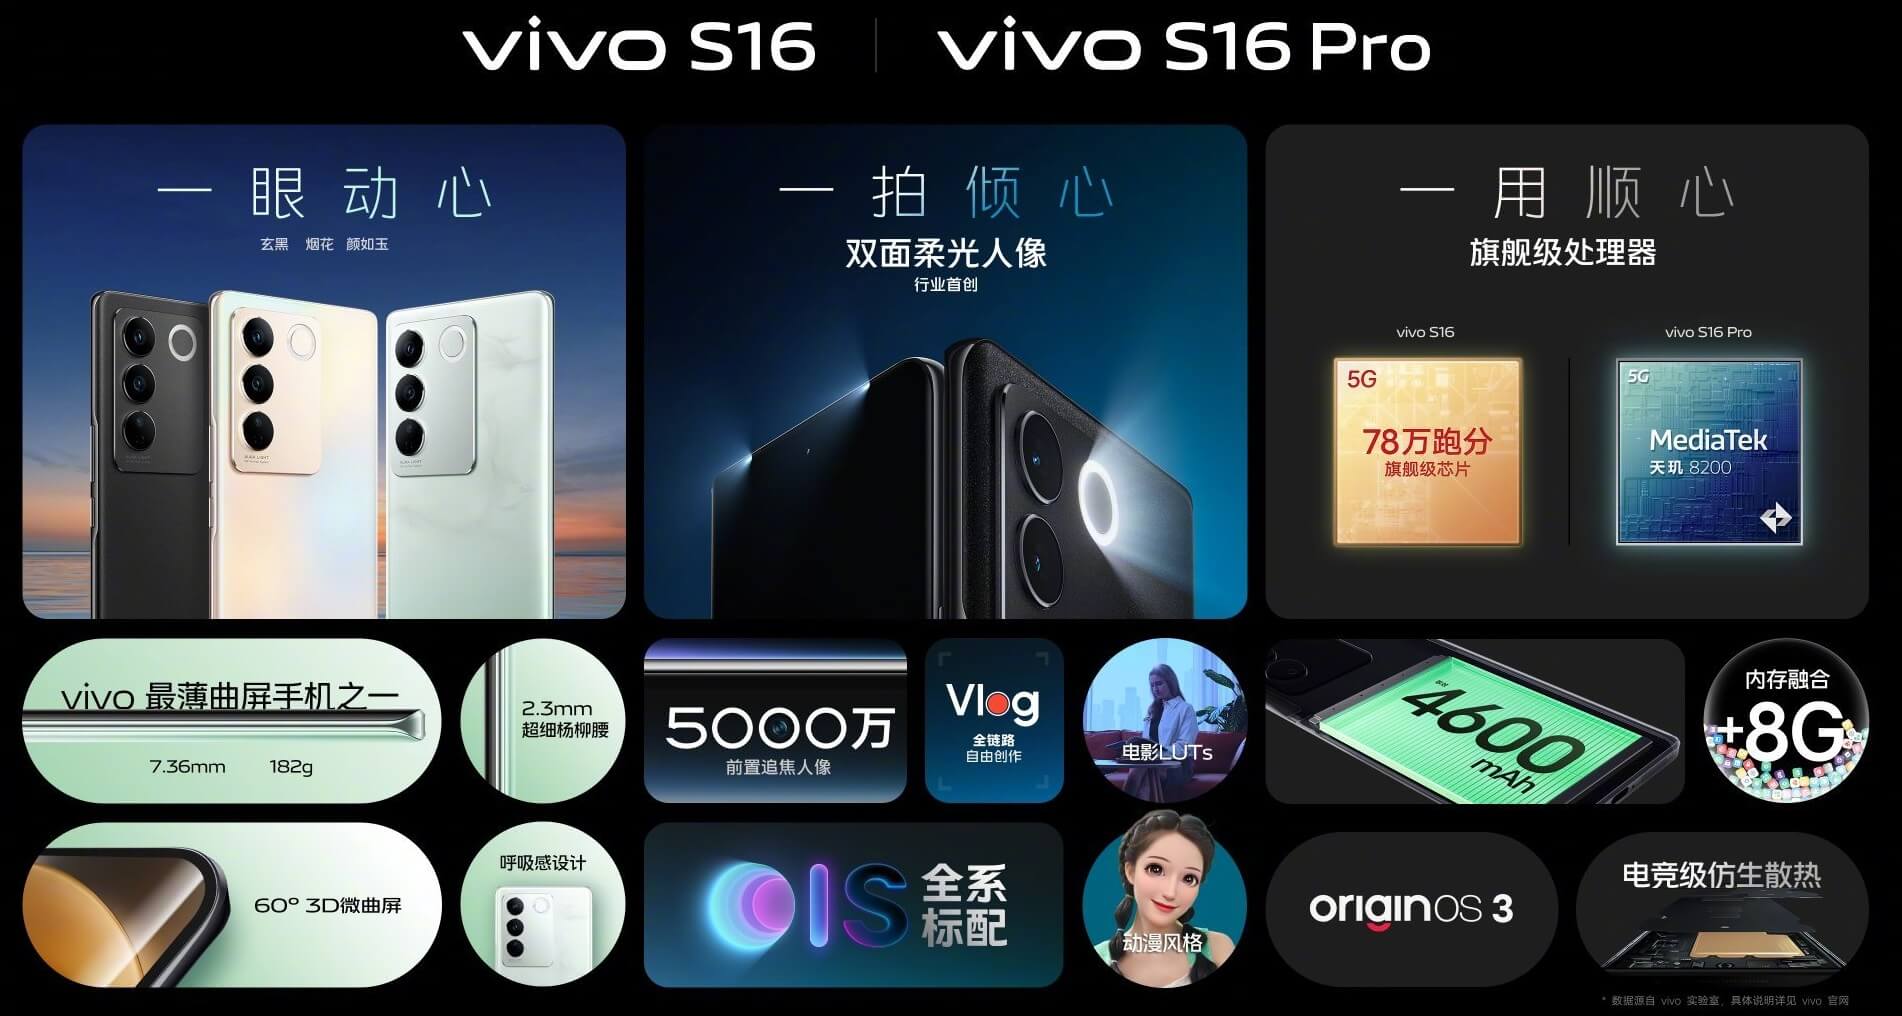 Vivo S16 and Vivo S16 Pro features cn